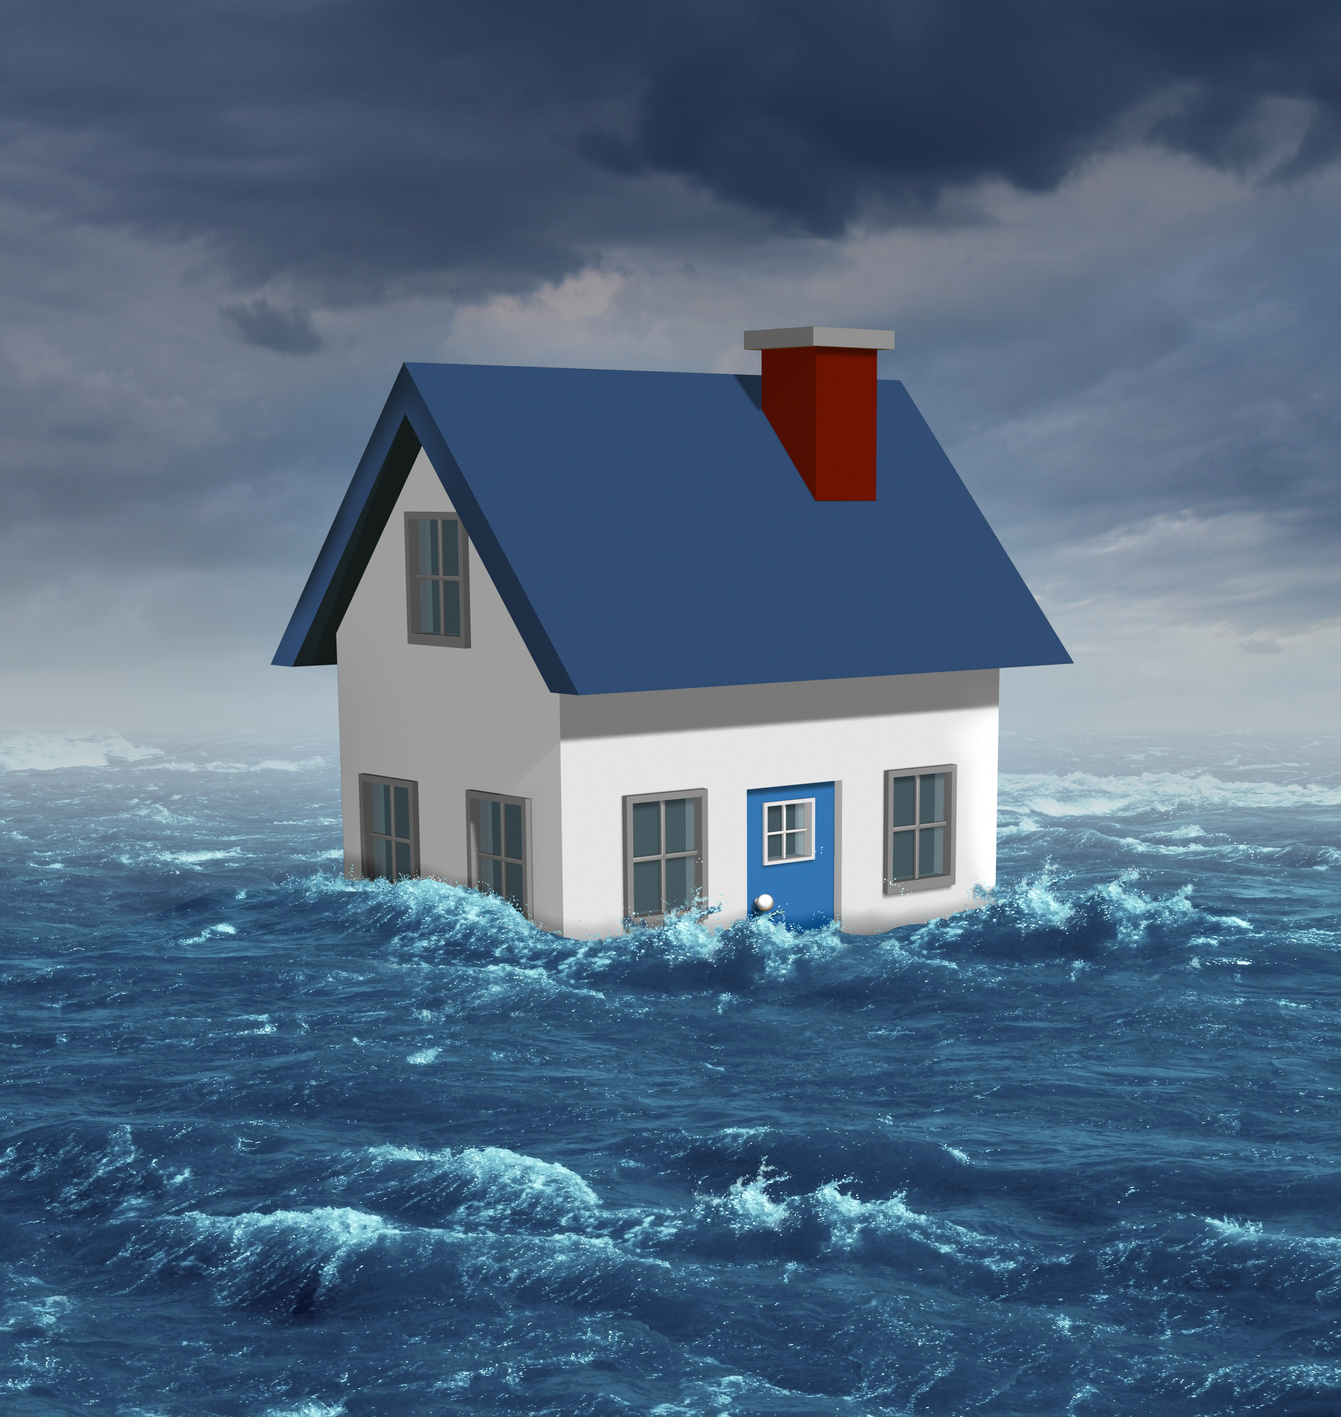 Stay Dry with the Right Flood Insurance Policy